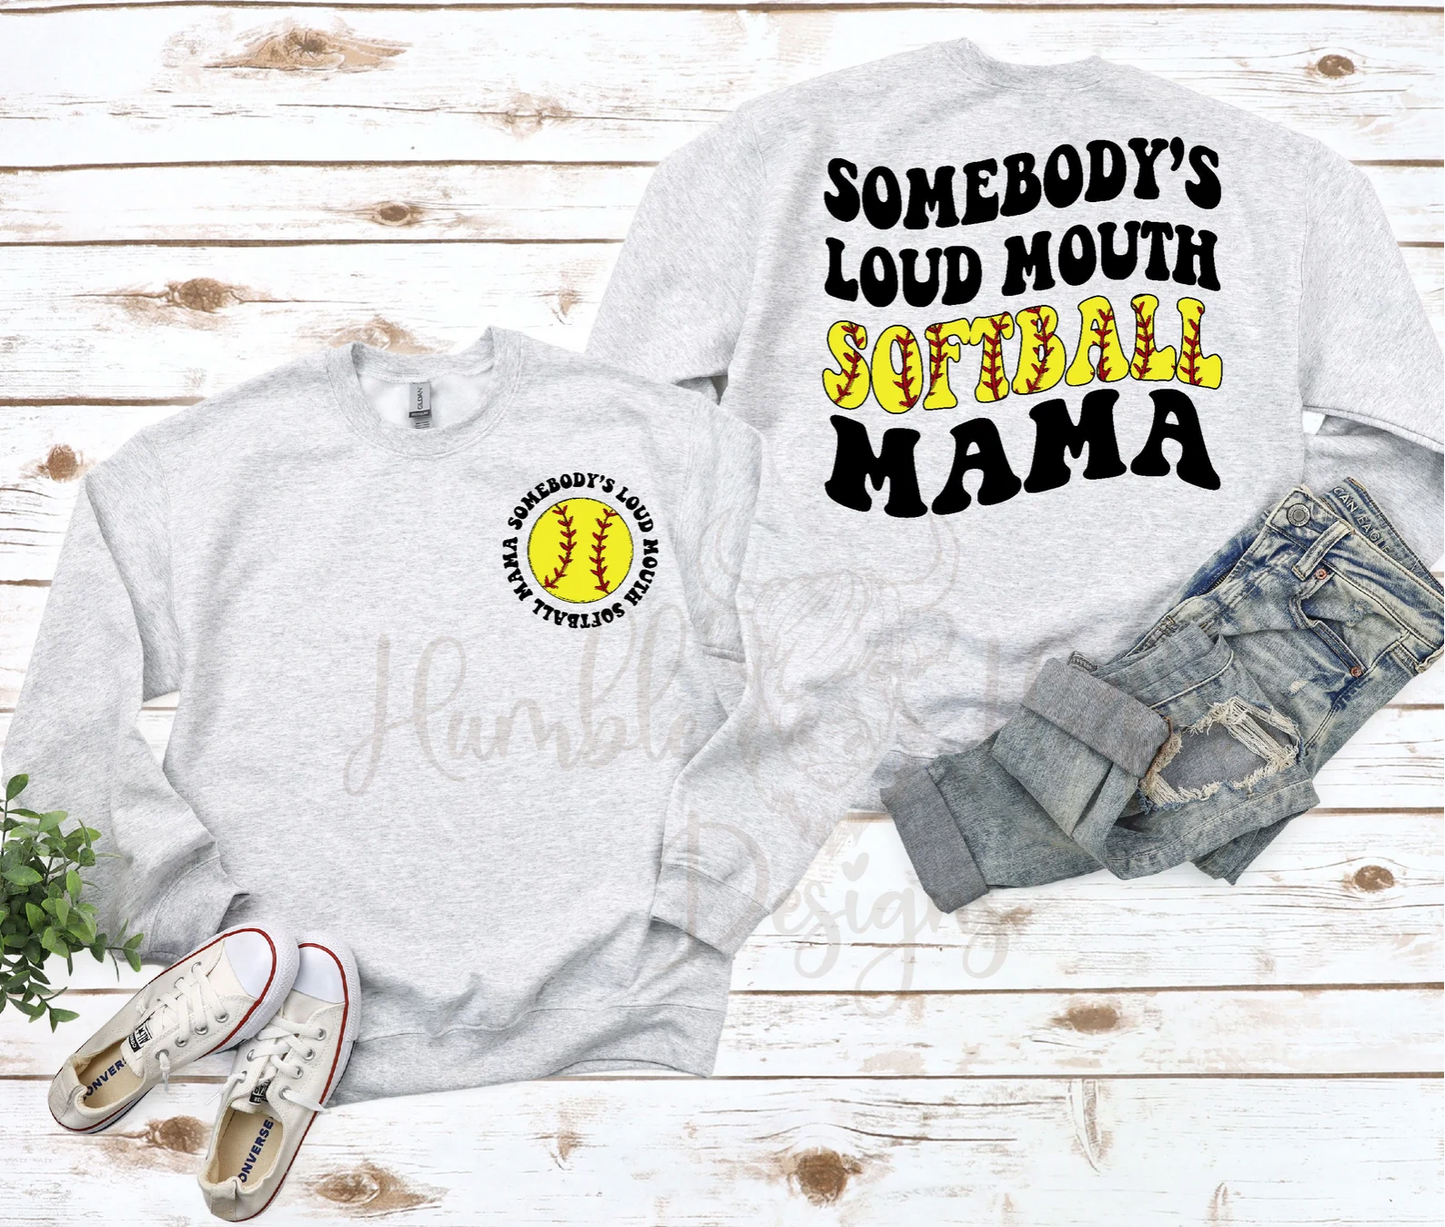 Someone's Loud and Proud Baseball Mama T-Shirt for Adults